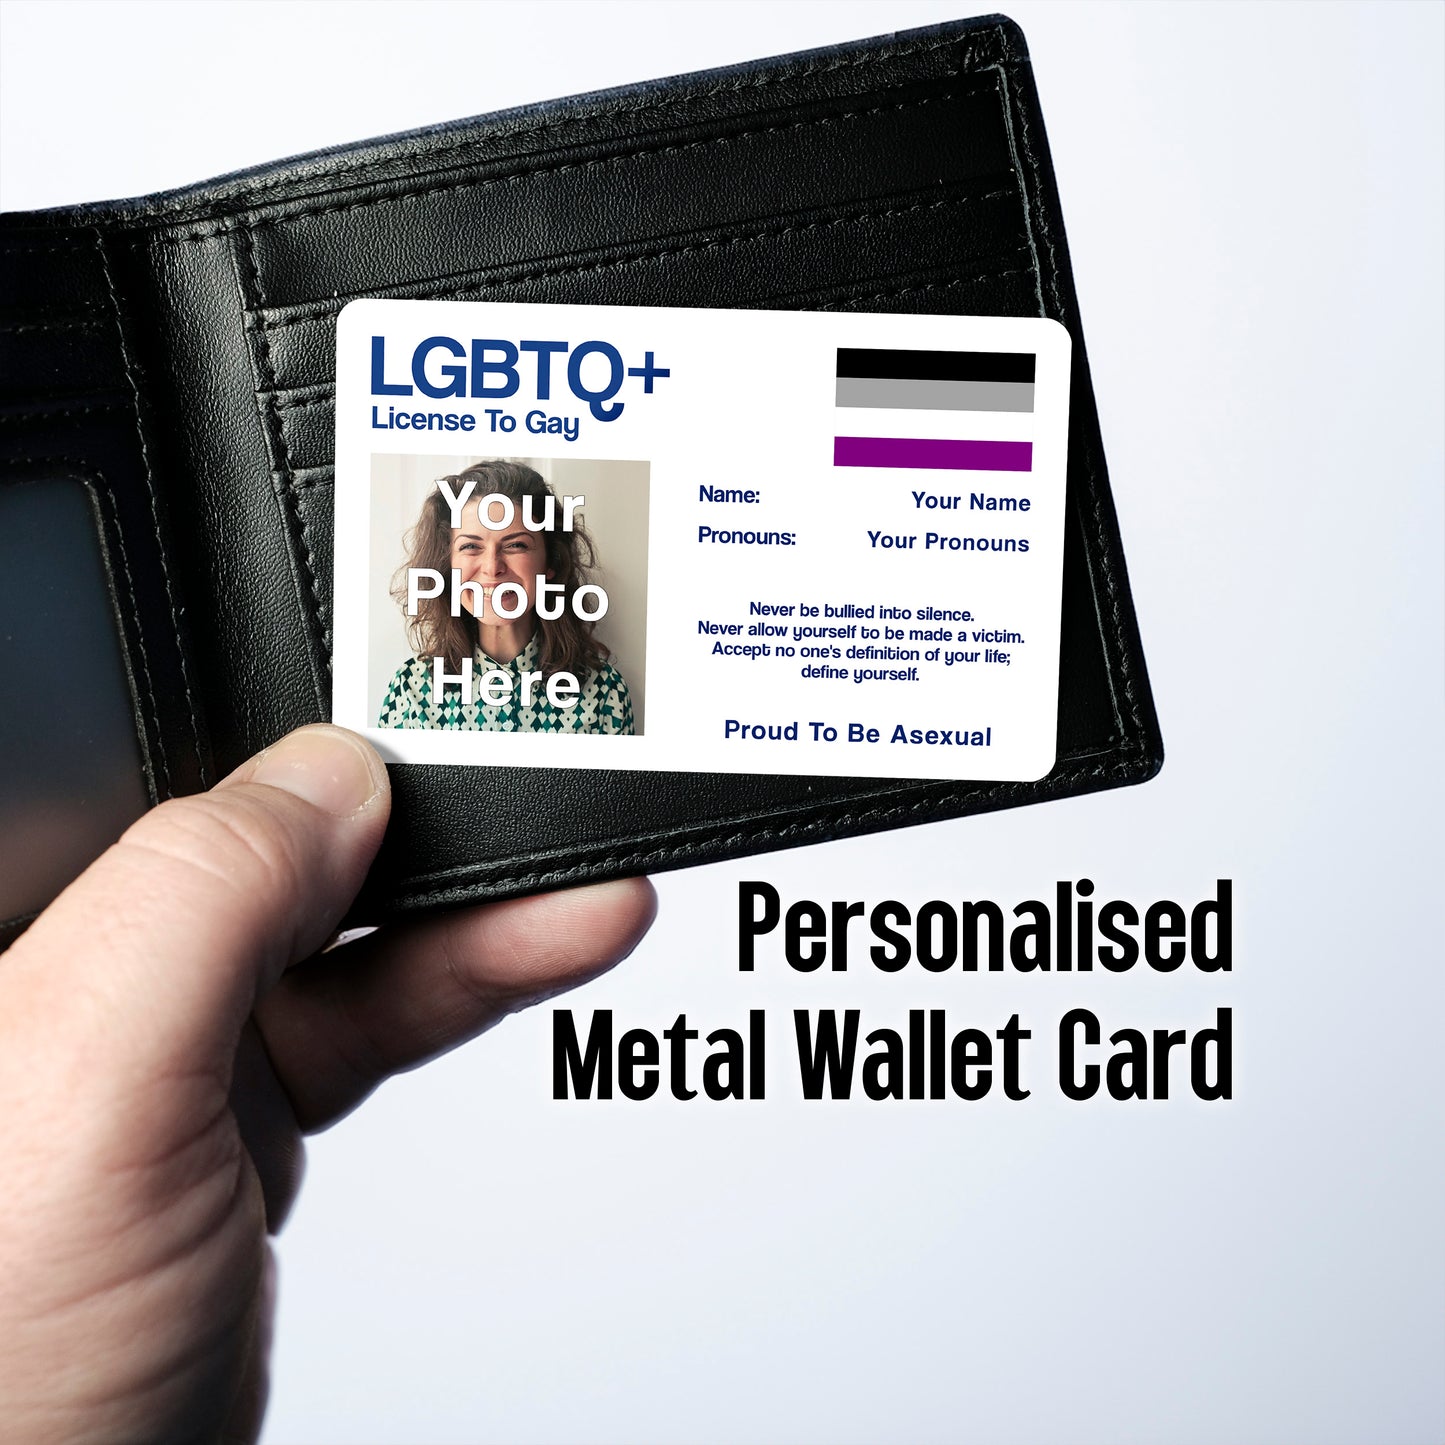 Asexual License To Gay aluminium wallet card personalised with your name, pronouns, and photo